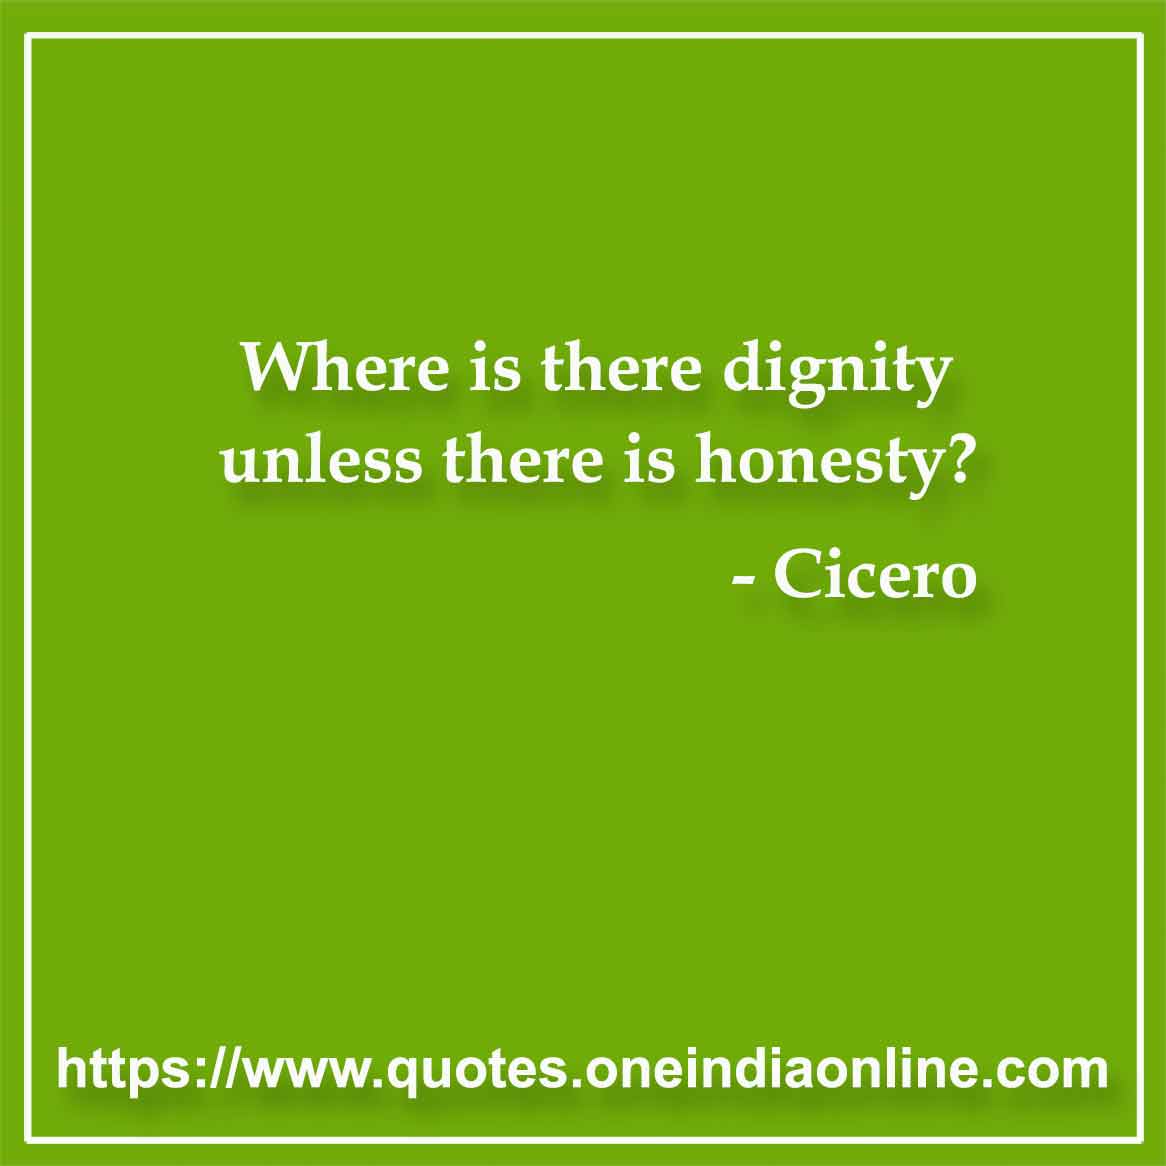 Where is there dignity unless there is honesty?

- Honesty Quotes by Cicero